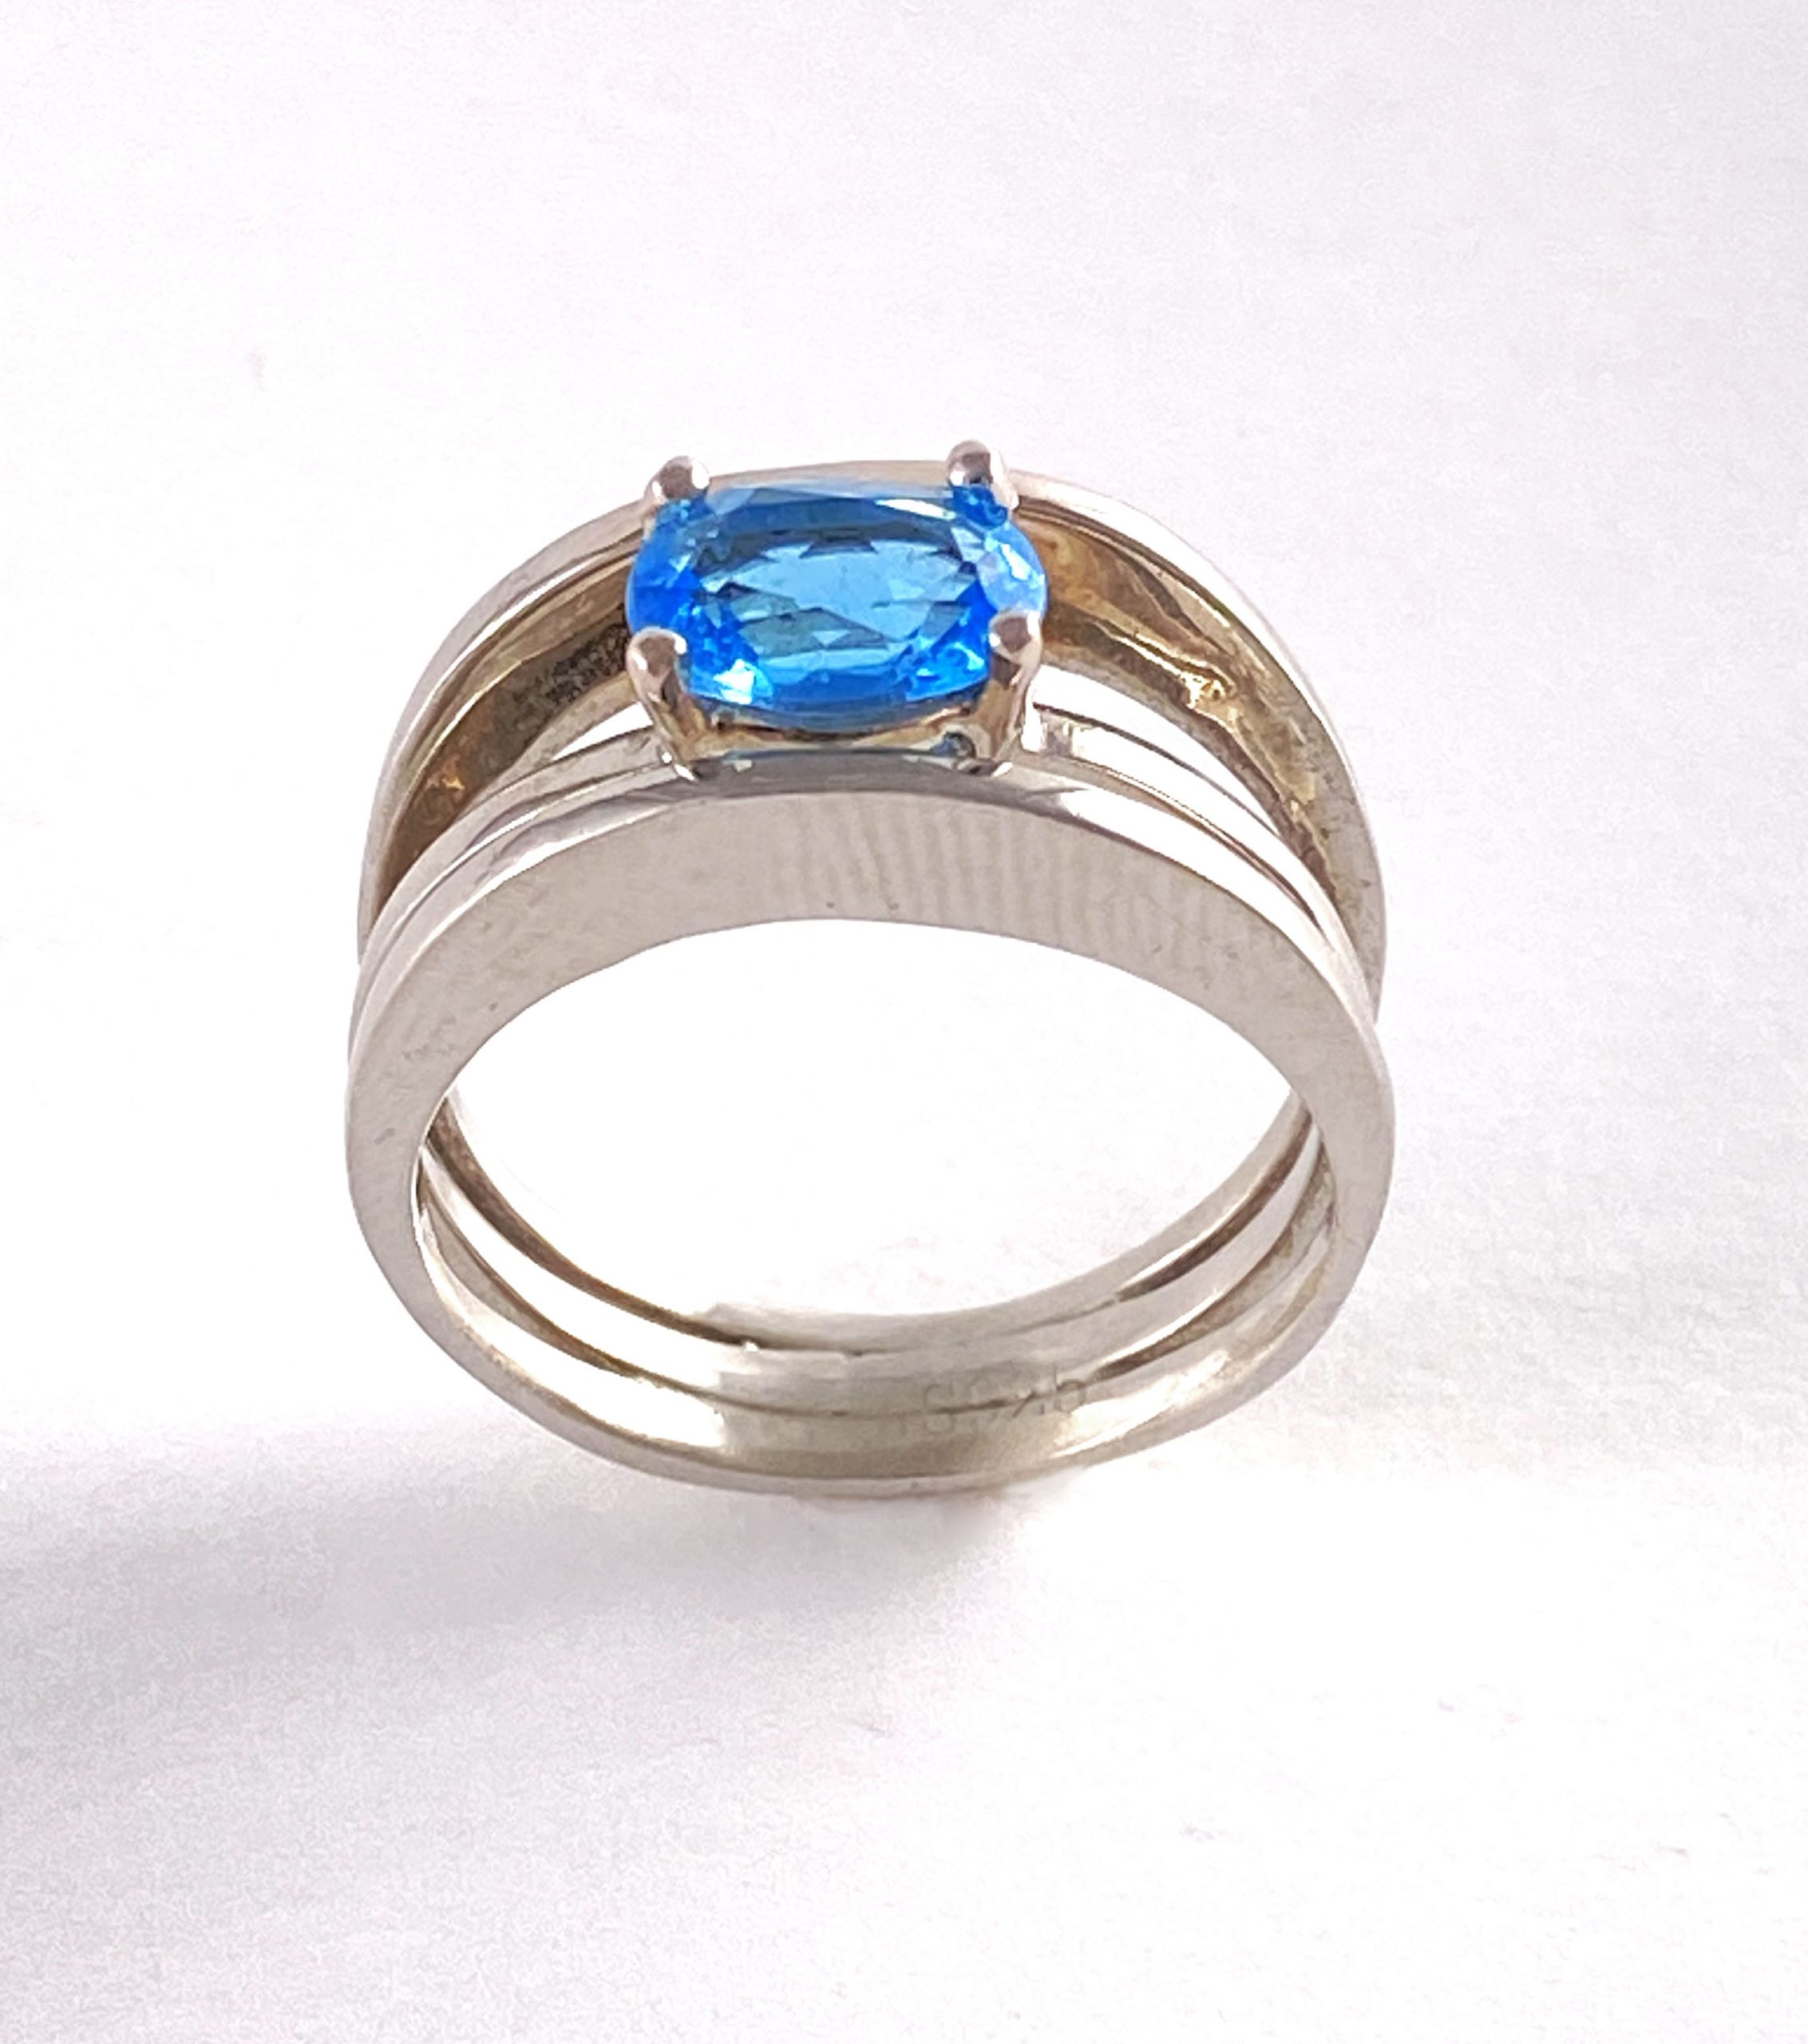 ring with Blue Topaz stone and 3 band design view 2